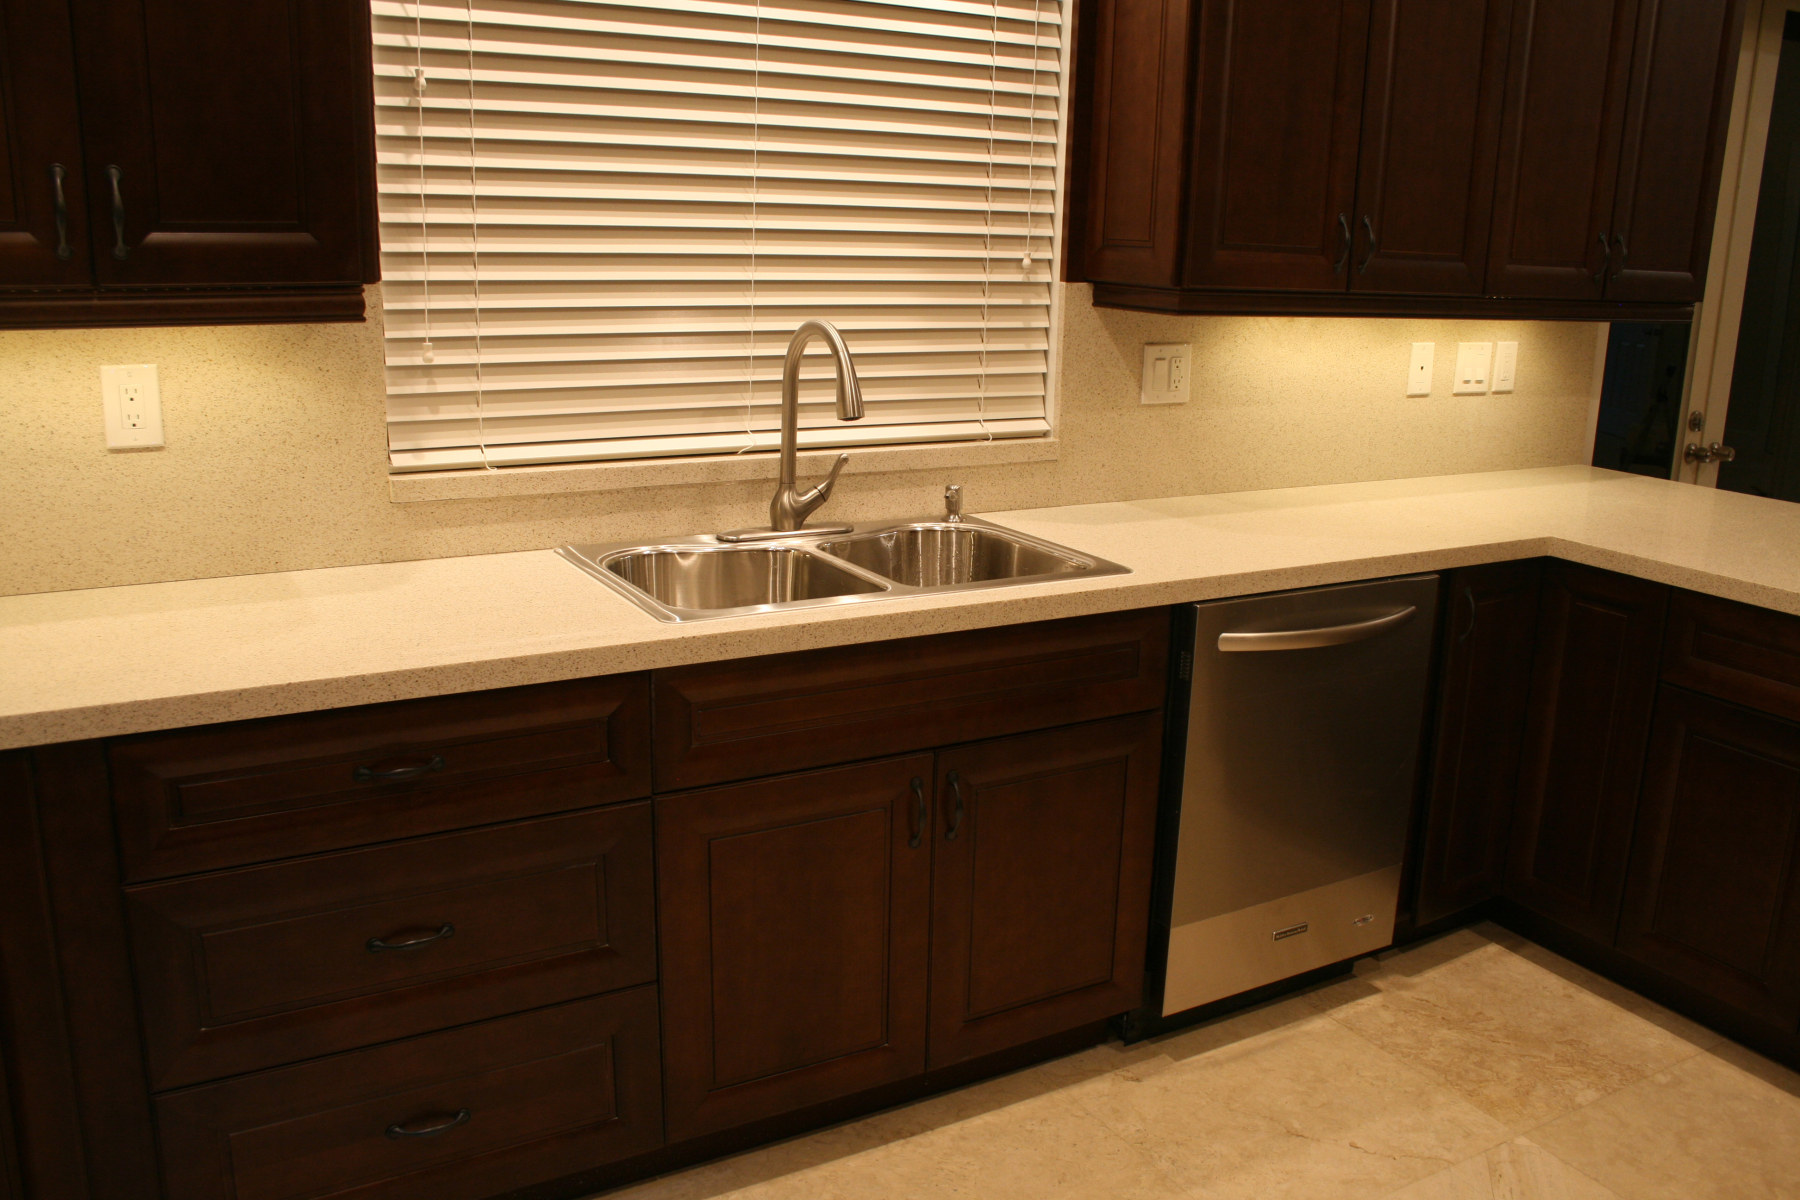 Stainless Steel Sink, Faucet and Dishwasher